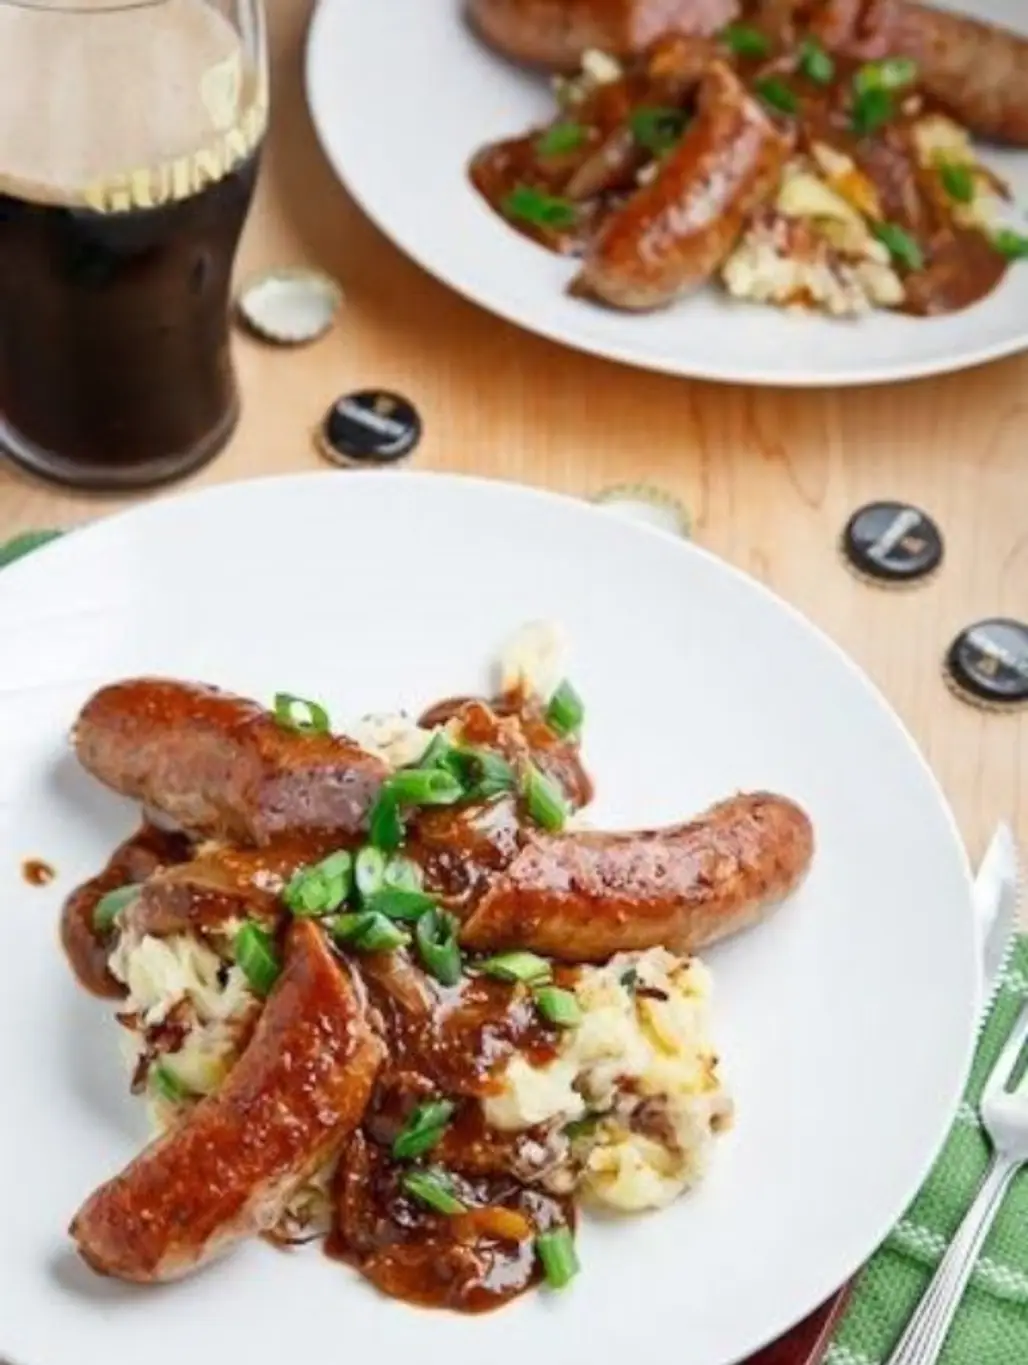 Bangers and Colcannon with Guinness Onion Gravy